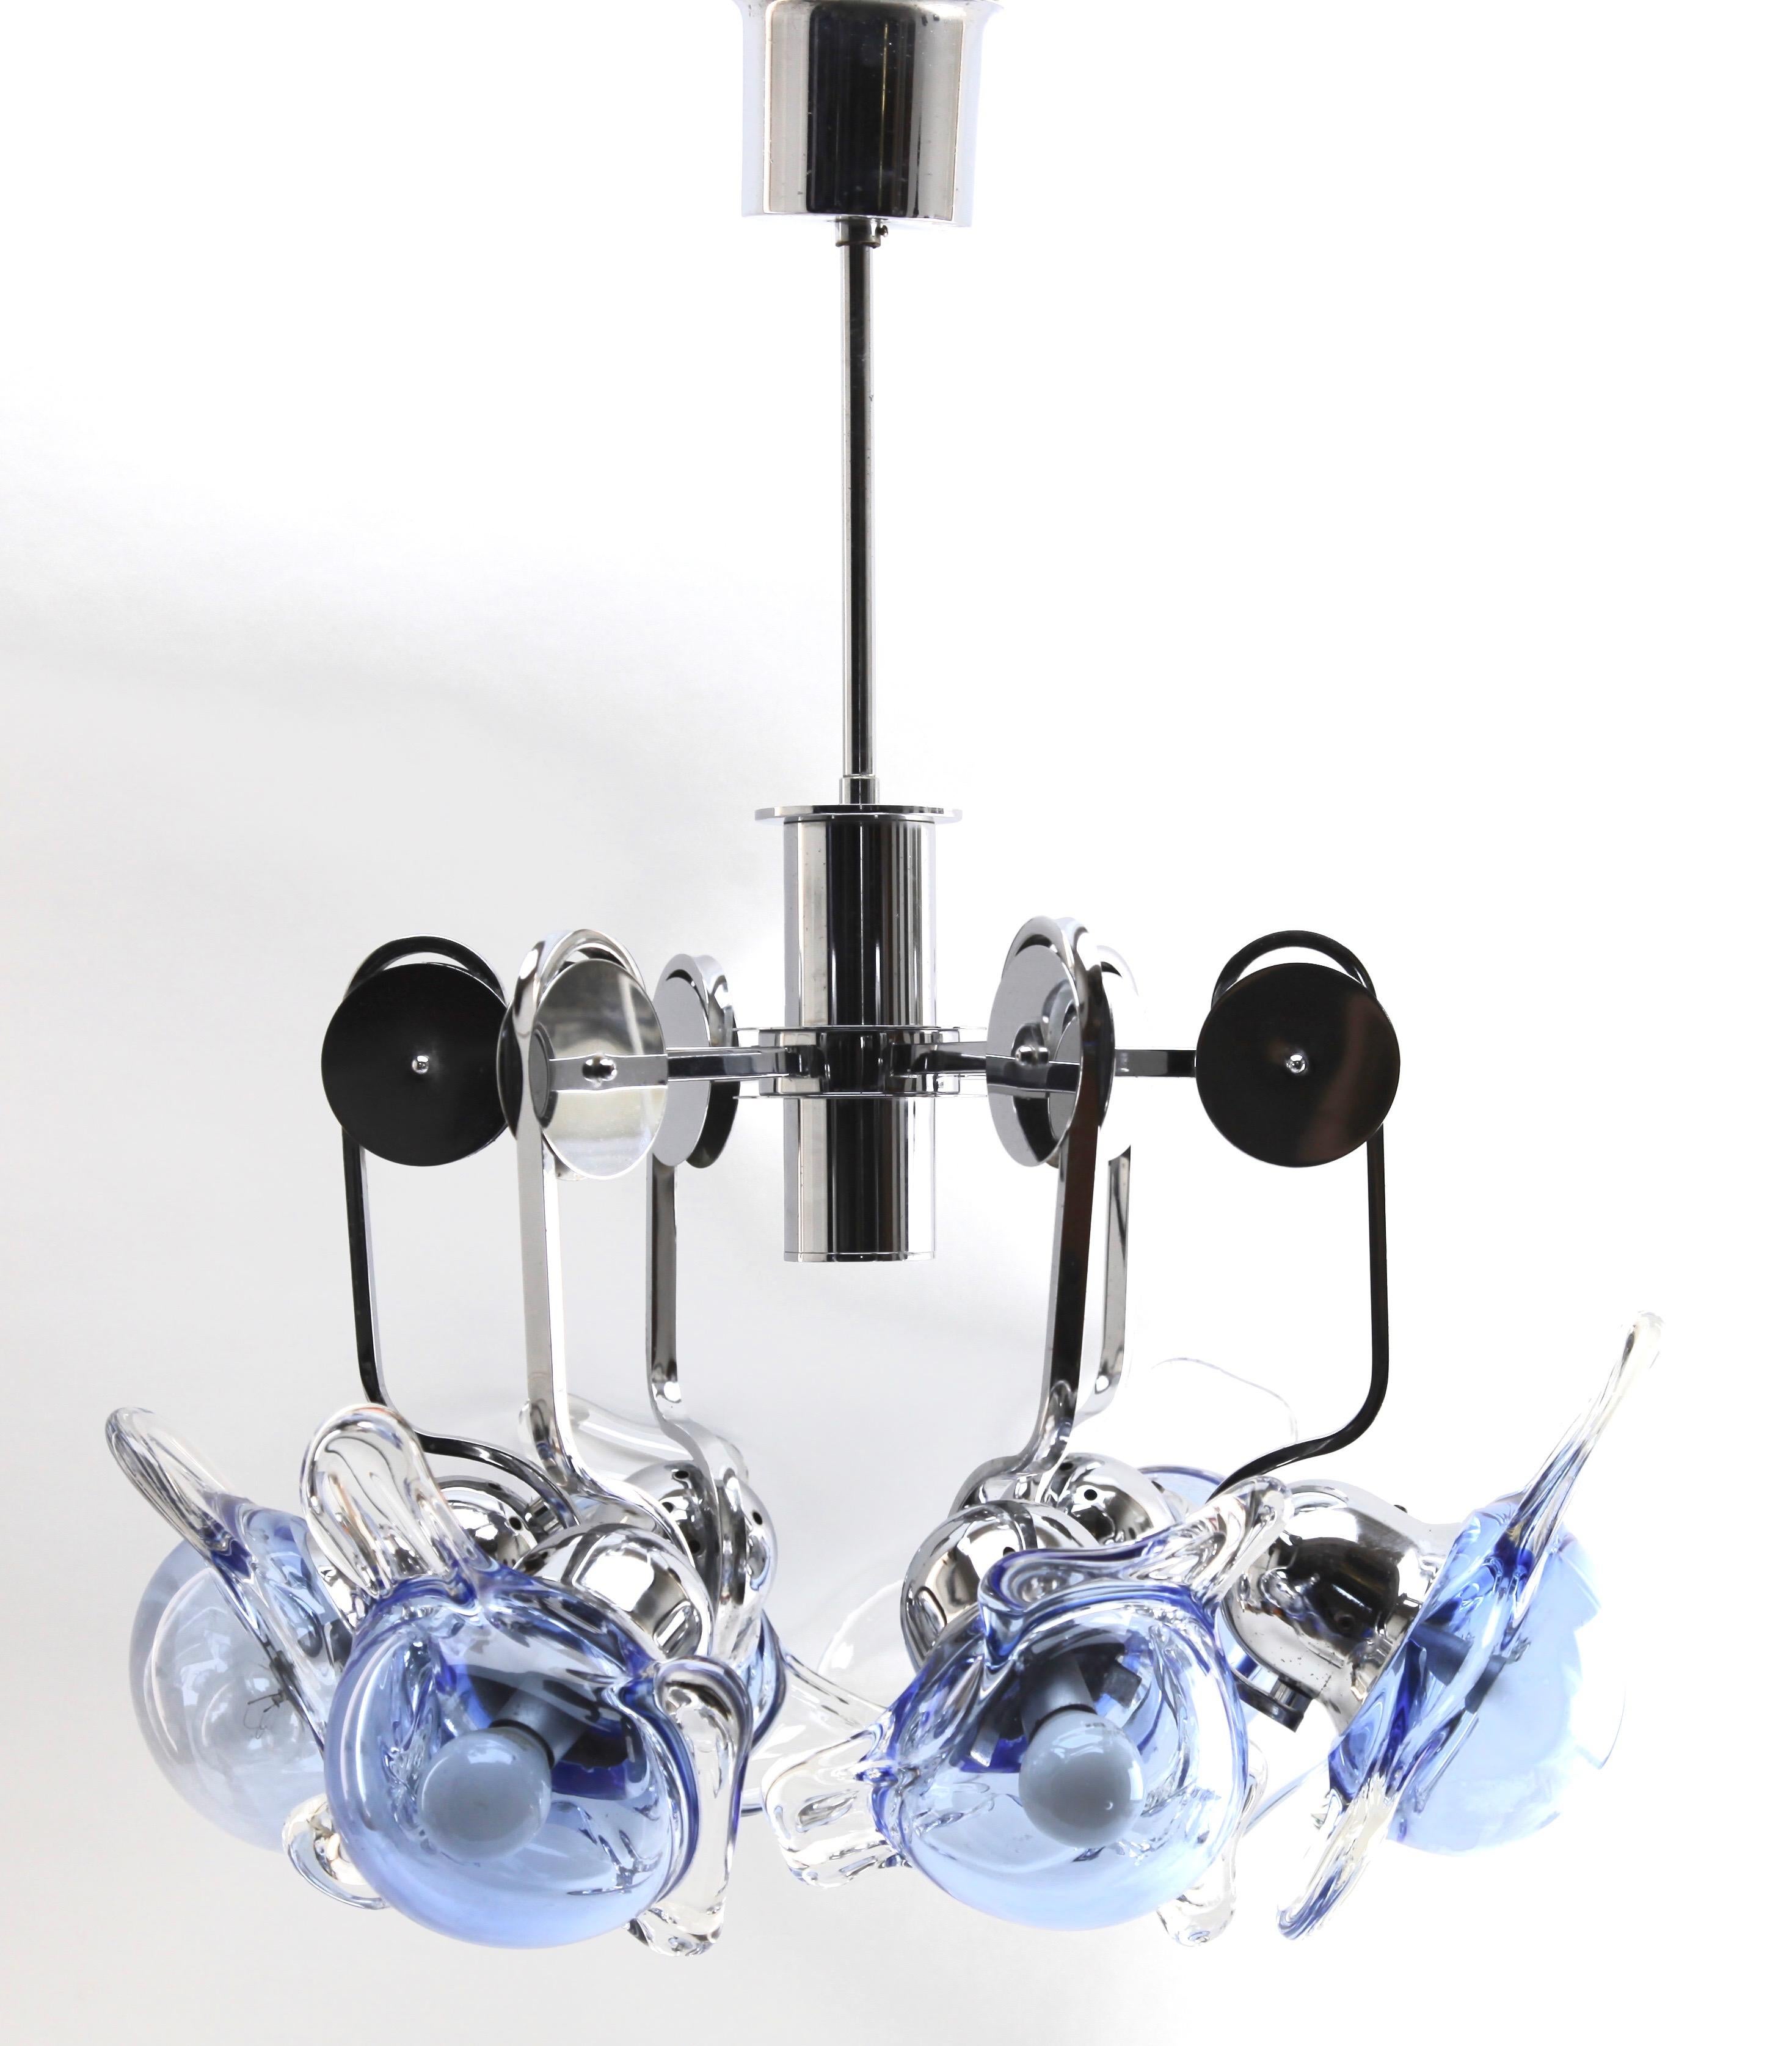 Chandelier on a fixed rod pendant with six arms and mounts of chromed metal, in the style of Sische Leuchten. Unusual glass heavy lampshades in light blue with strong fixings.
Size lampshades: height 10 cm = 3.93 inch diameter 24 cm = 9.44